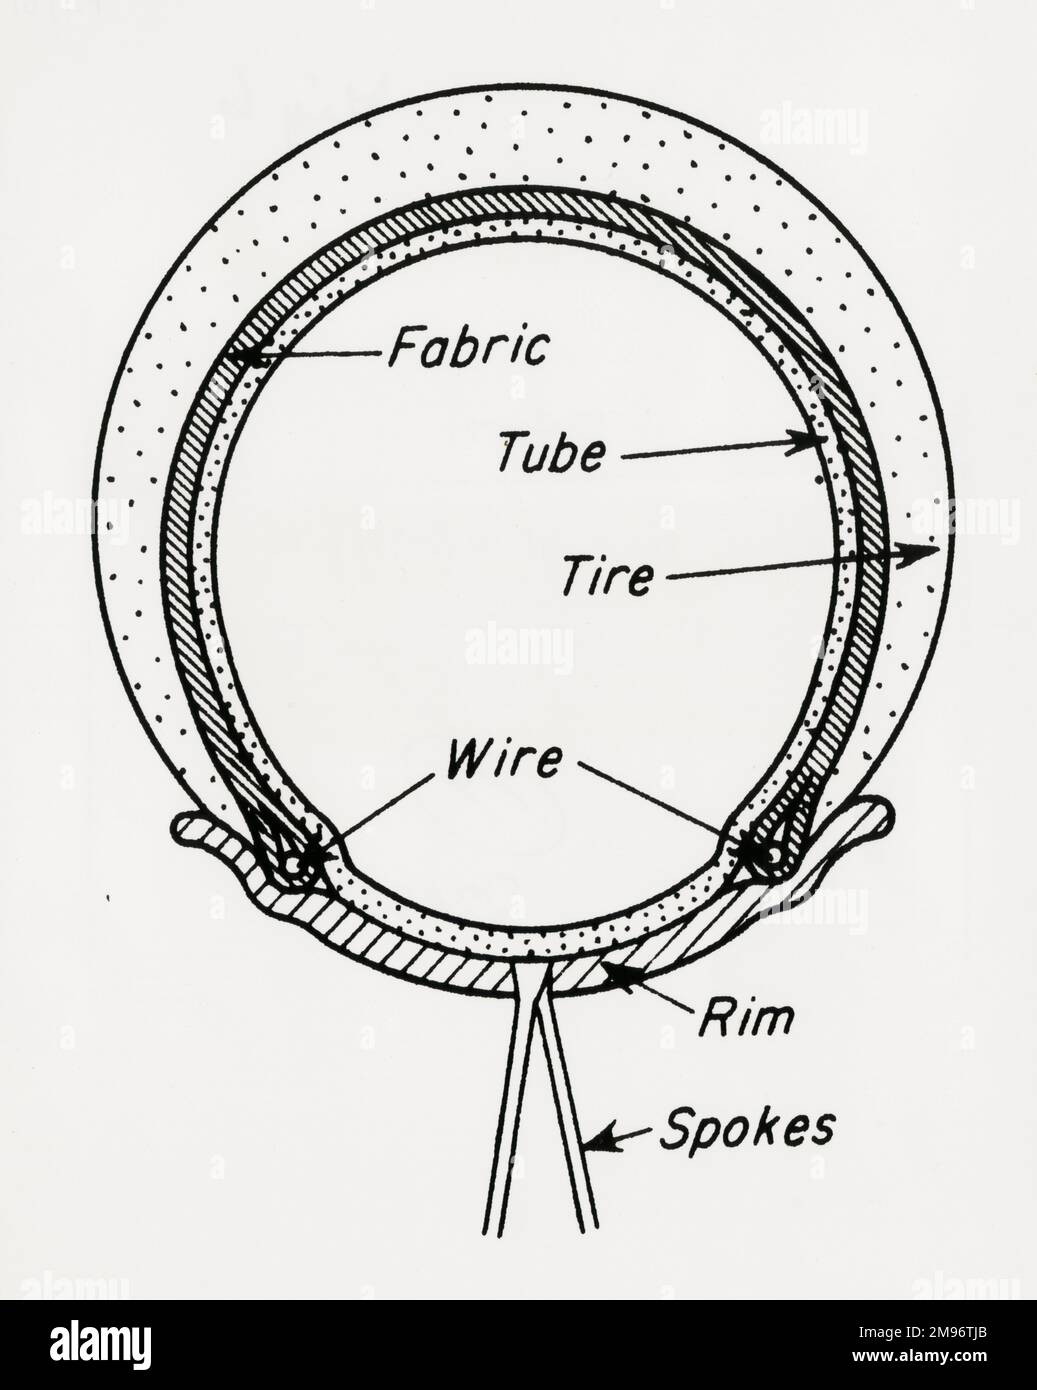 Diagram of Welch rim bicycle tyre, 1890 Stock Photo